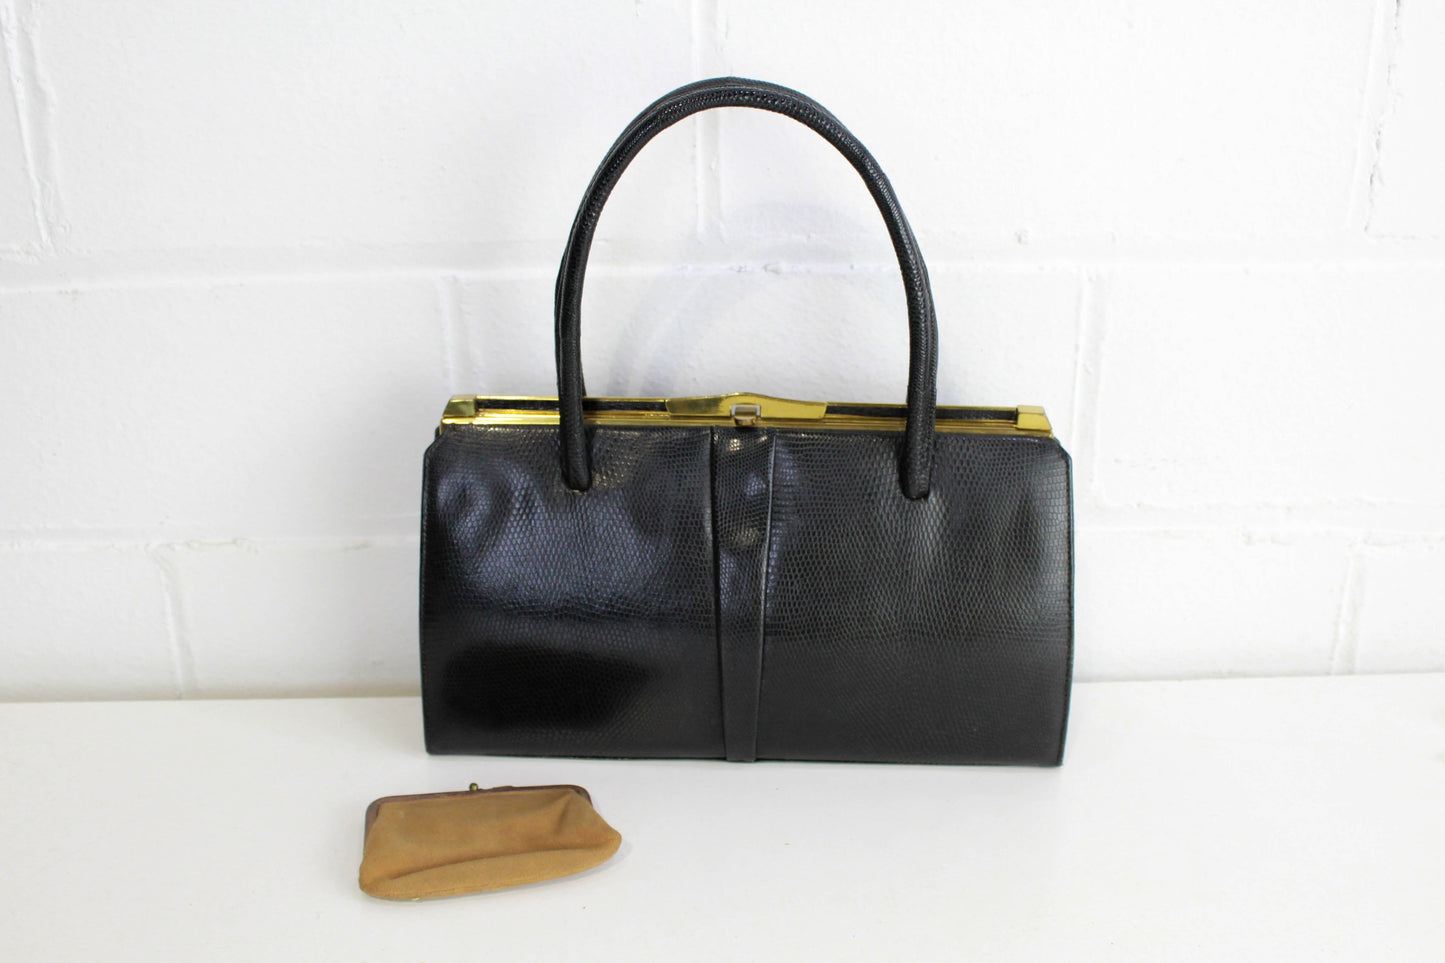 Vintage top handle bag with padlock, 1990s in mustard leather